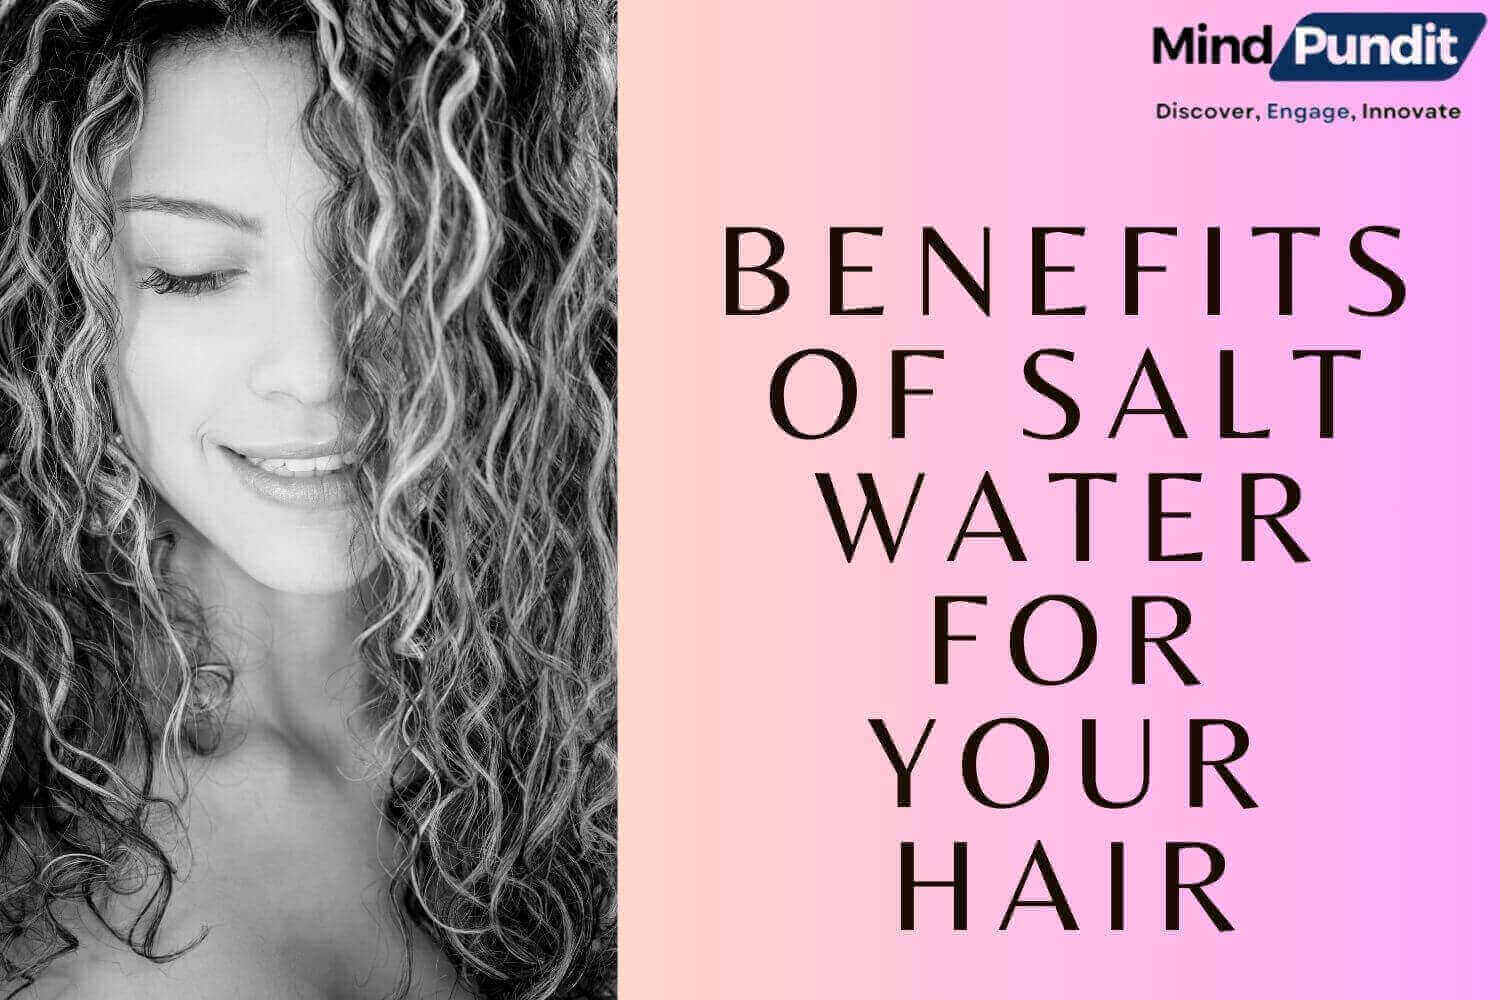 Is salt water good for your hair